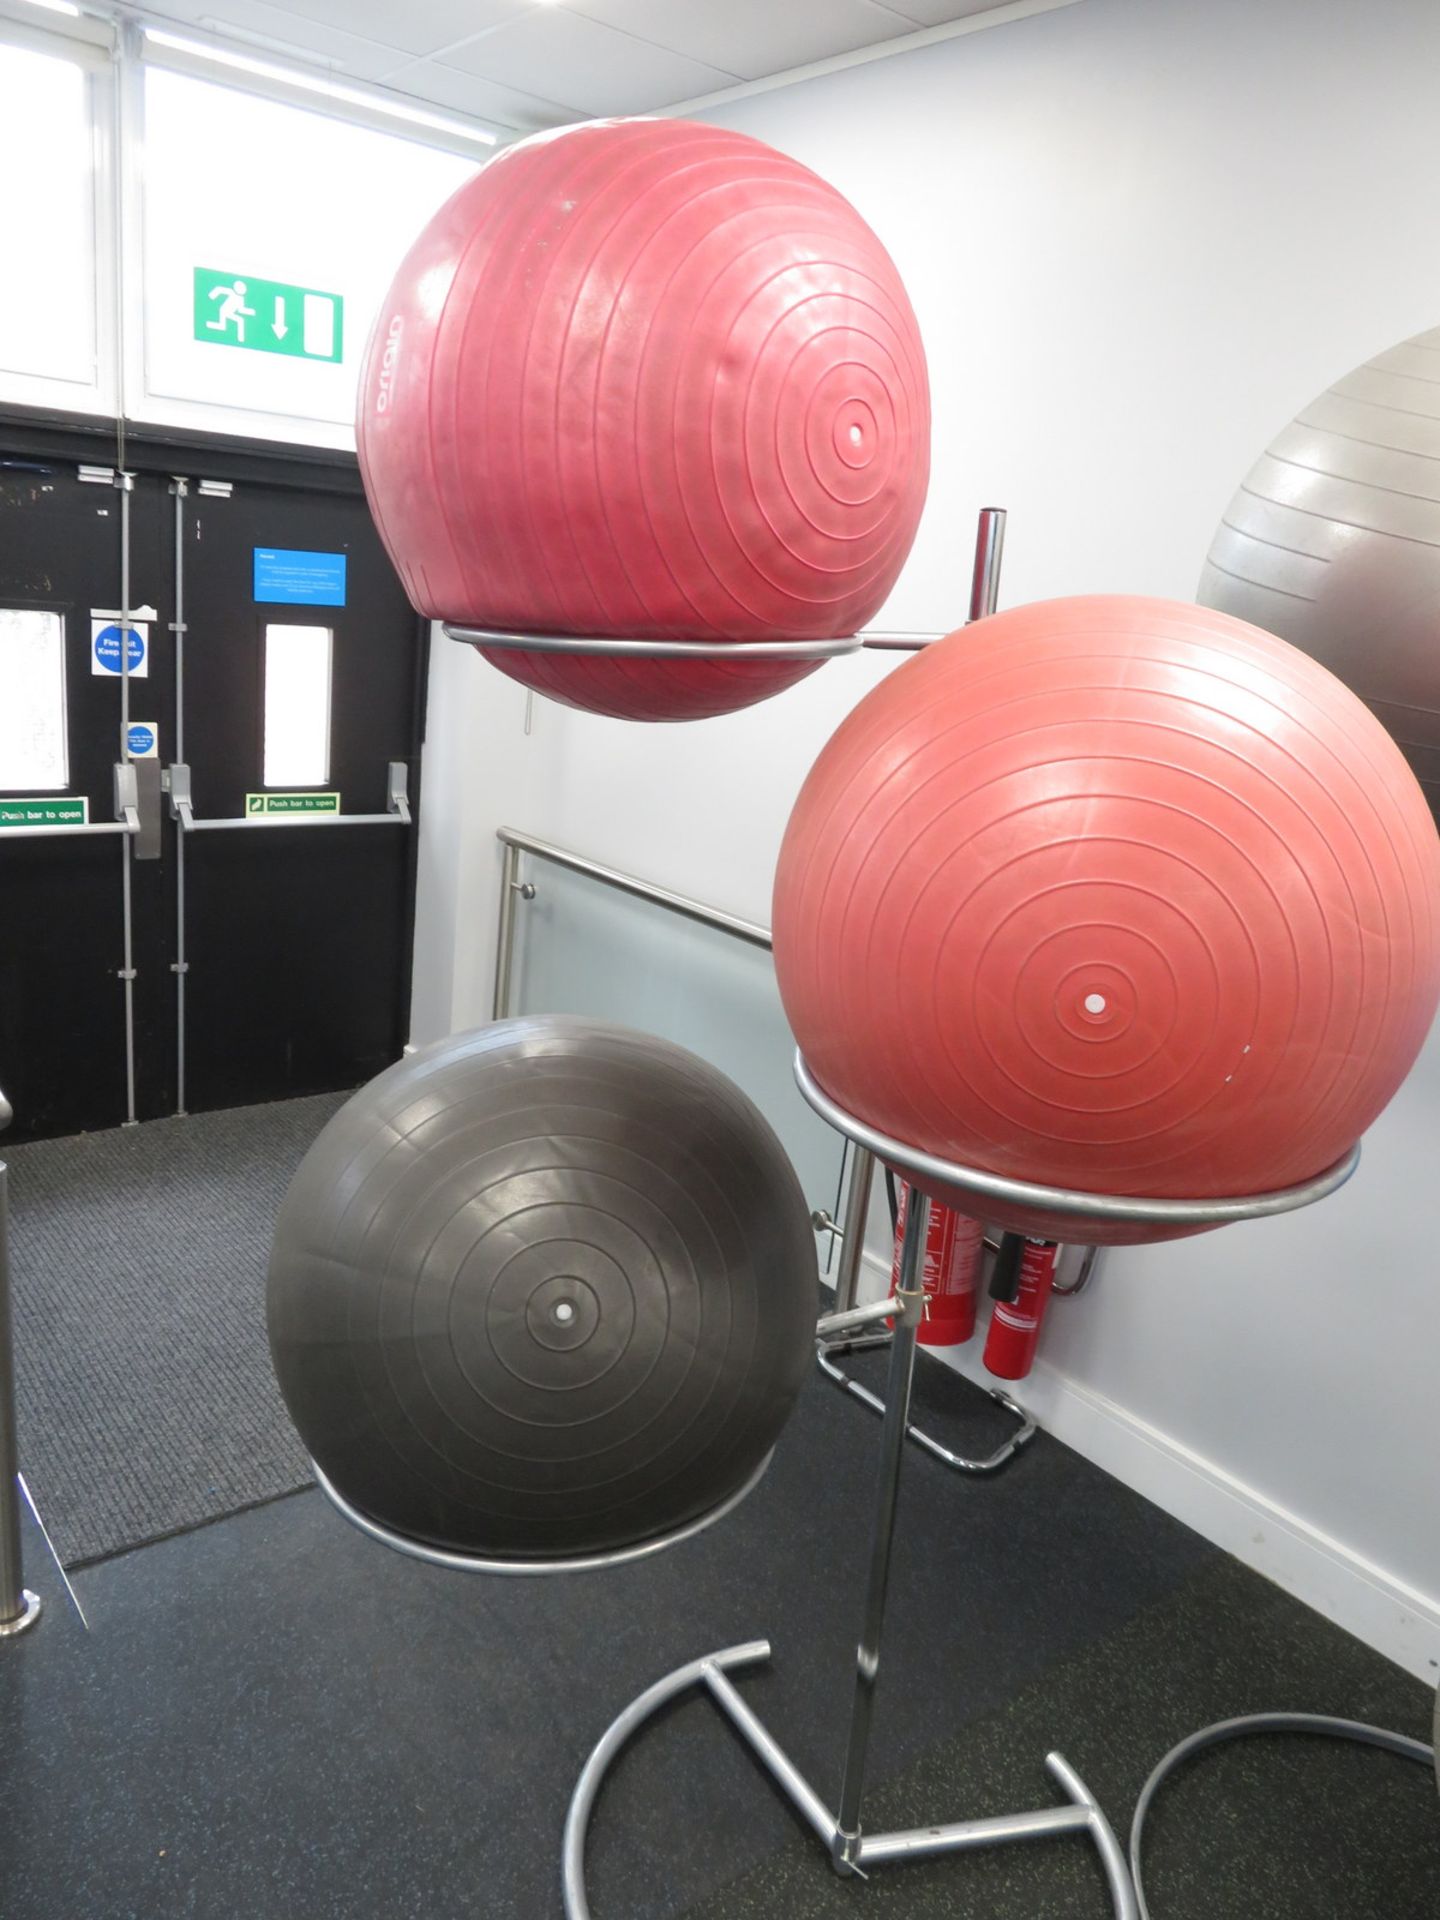 6x Pilates/Yoga Exercise Balls With 2 Stands - Various Sizes. - Image 3 of 6